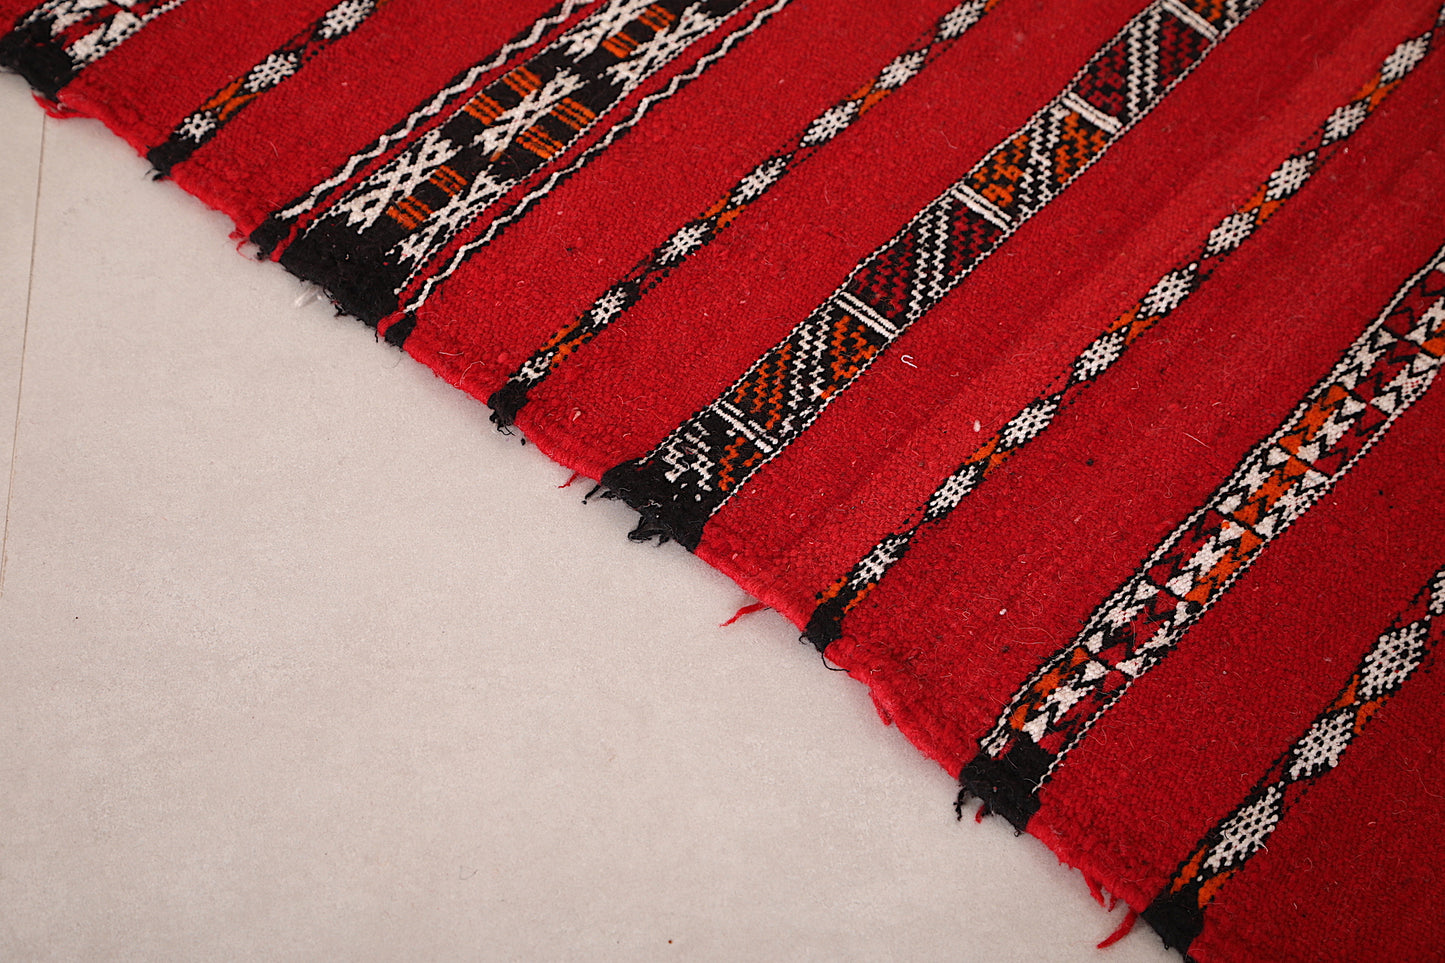 Small kilim from morocco 2.2ft x 5.2ft